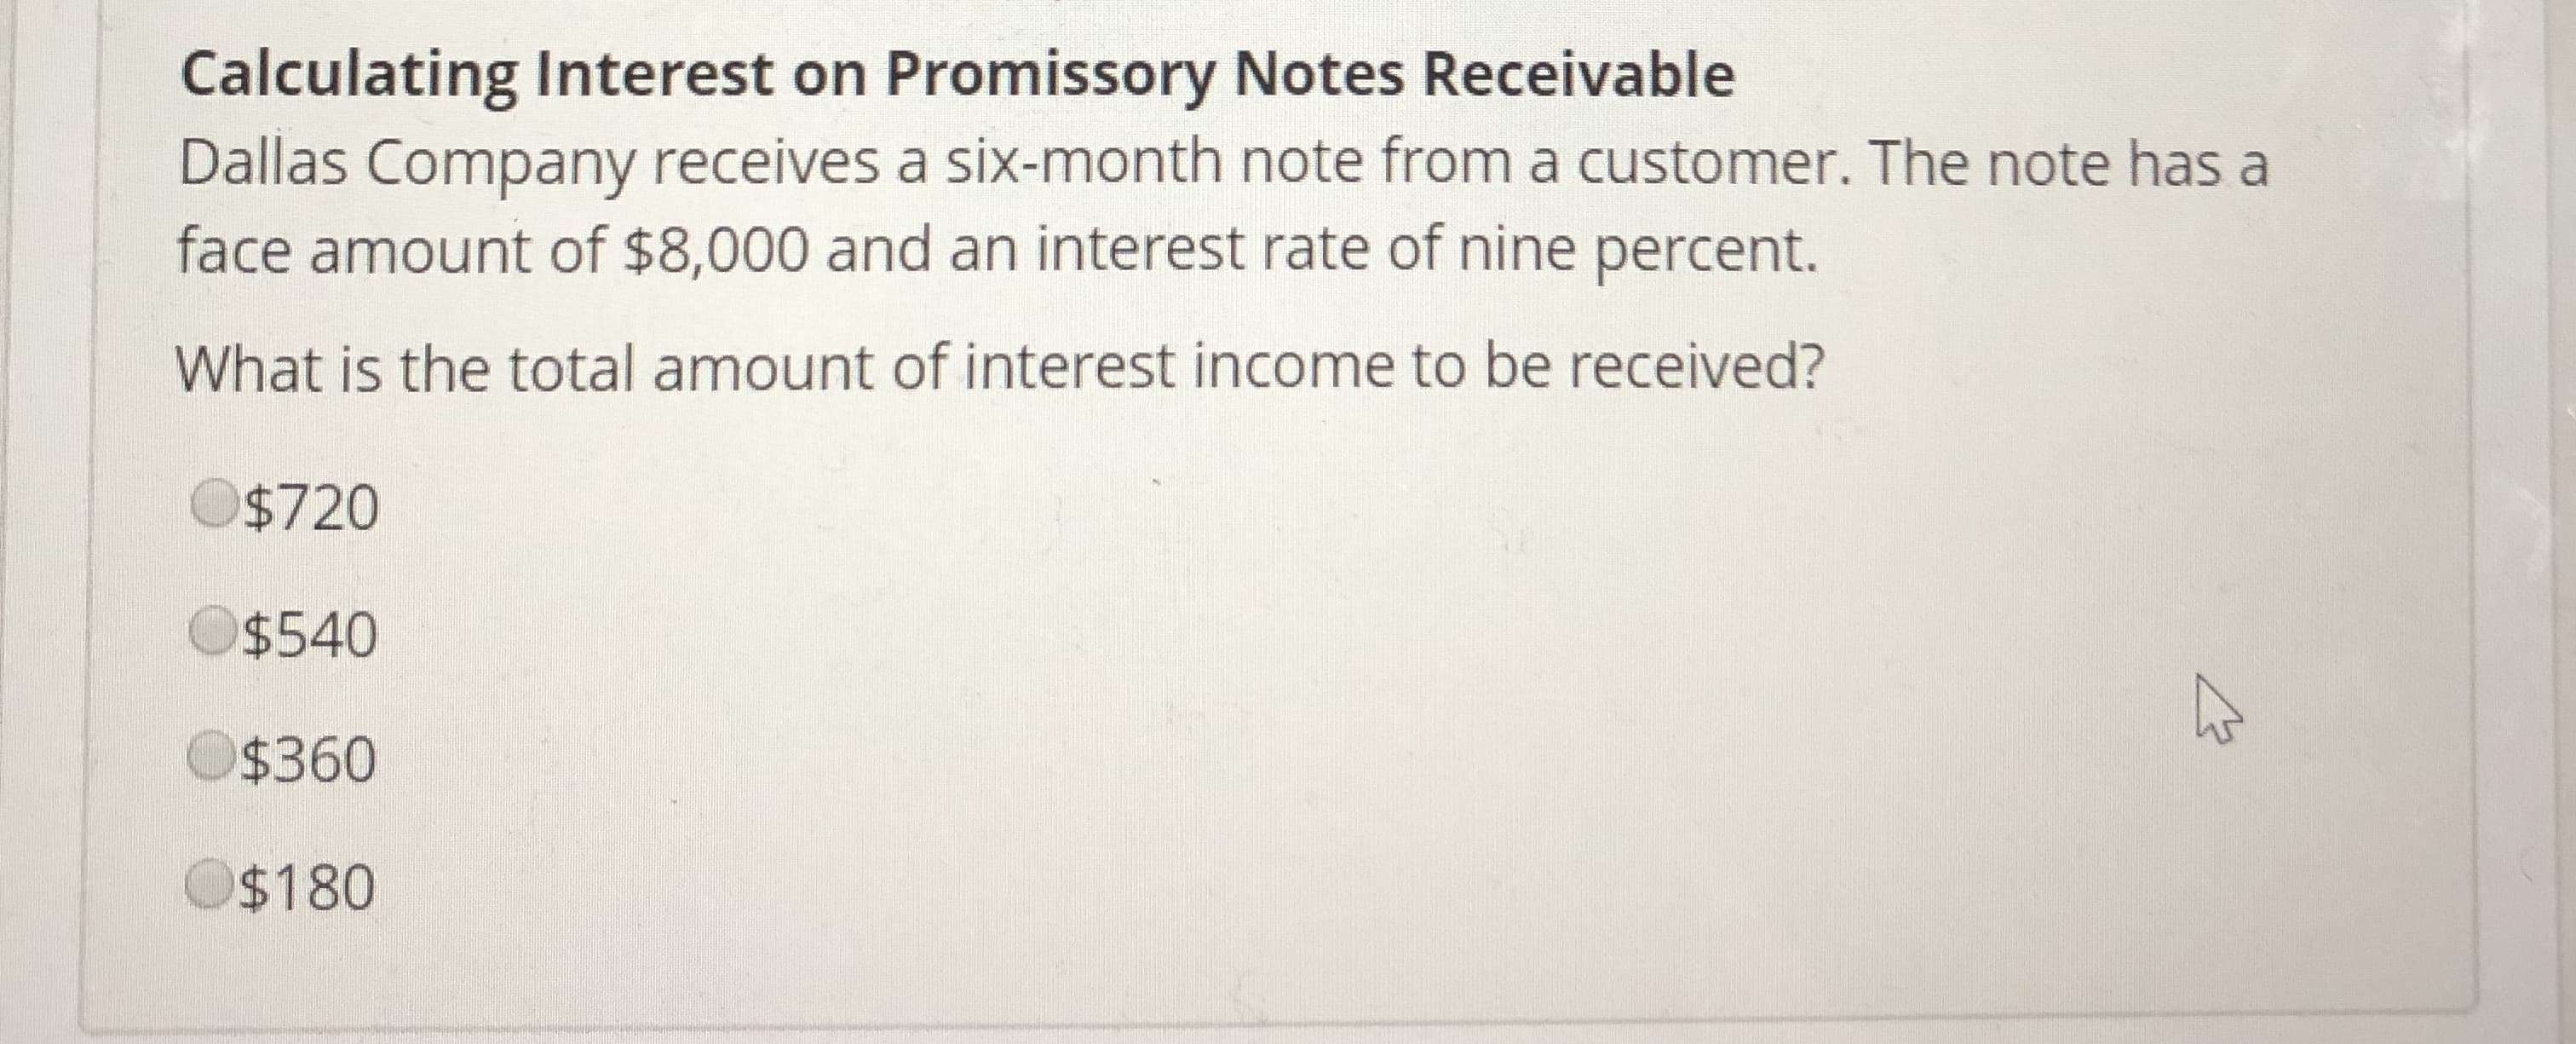 Calculating Interest on Promissory Notes Receivable
Dallas Company receives a six-month note from a customer. The note has a
face amount of $8,000 and an interest rate of nine percent.
What is the total amount of interest income to be received?
O$720
$540
$360
$180
